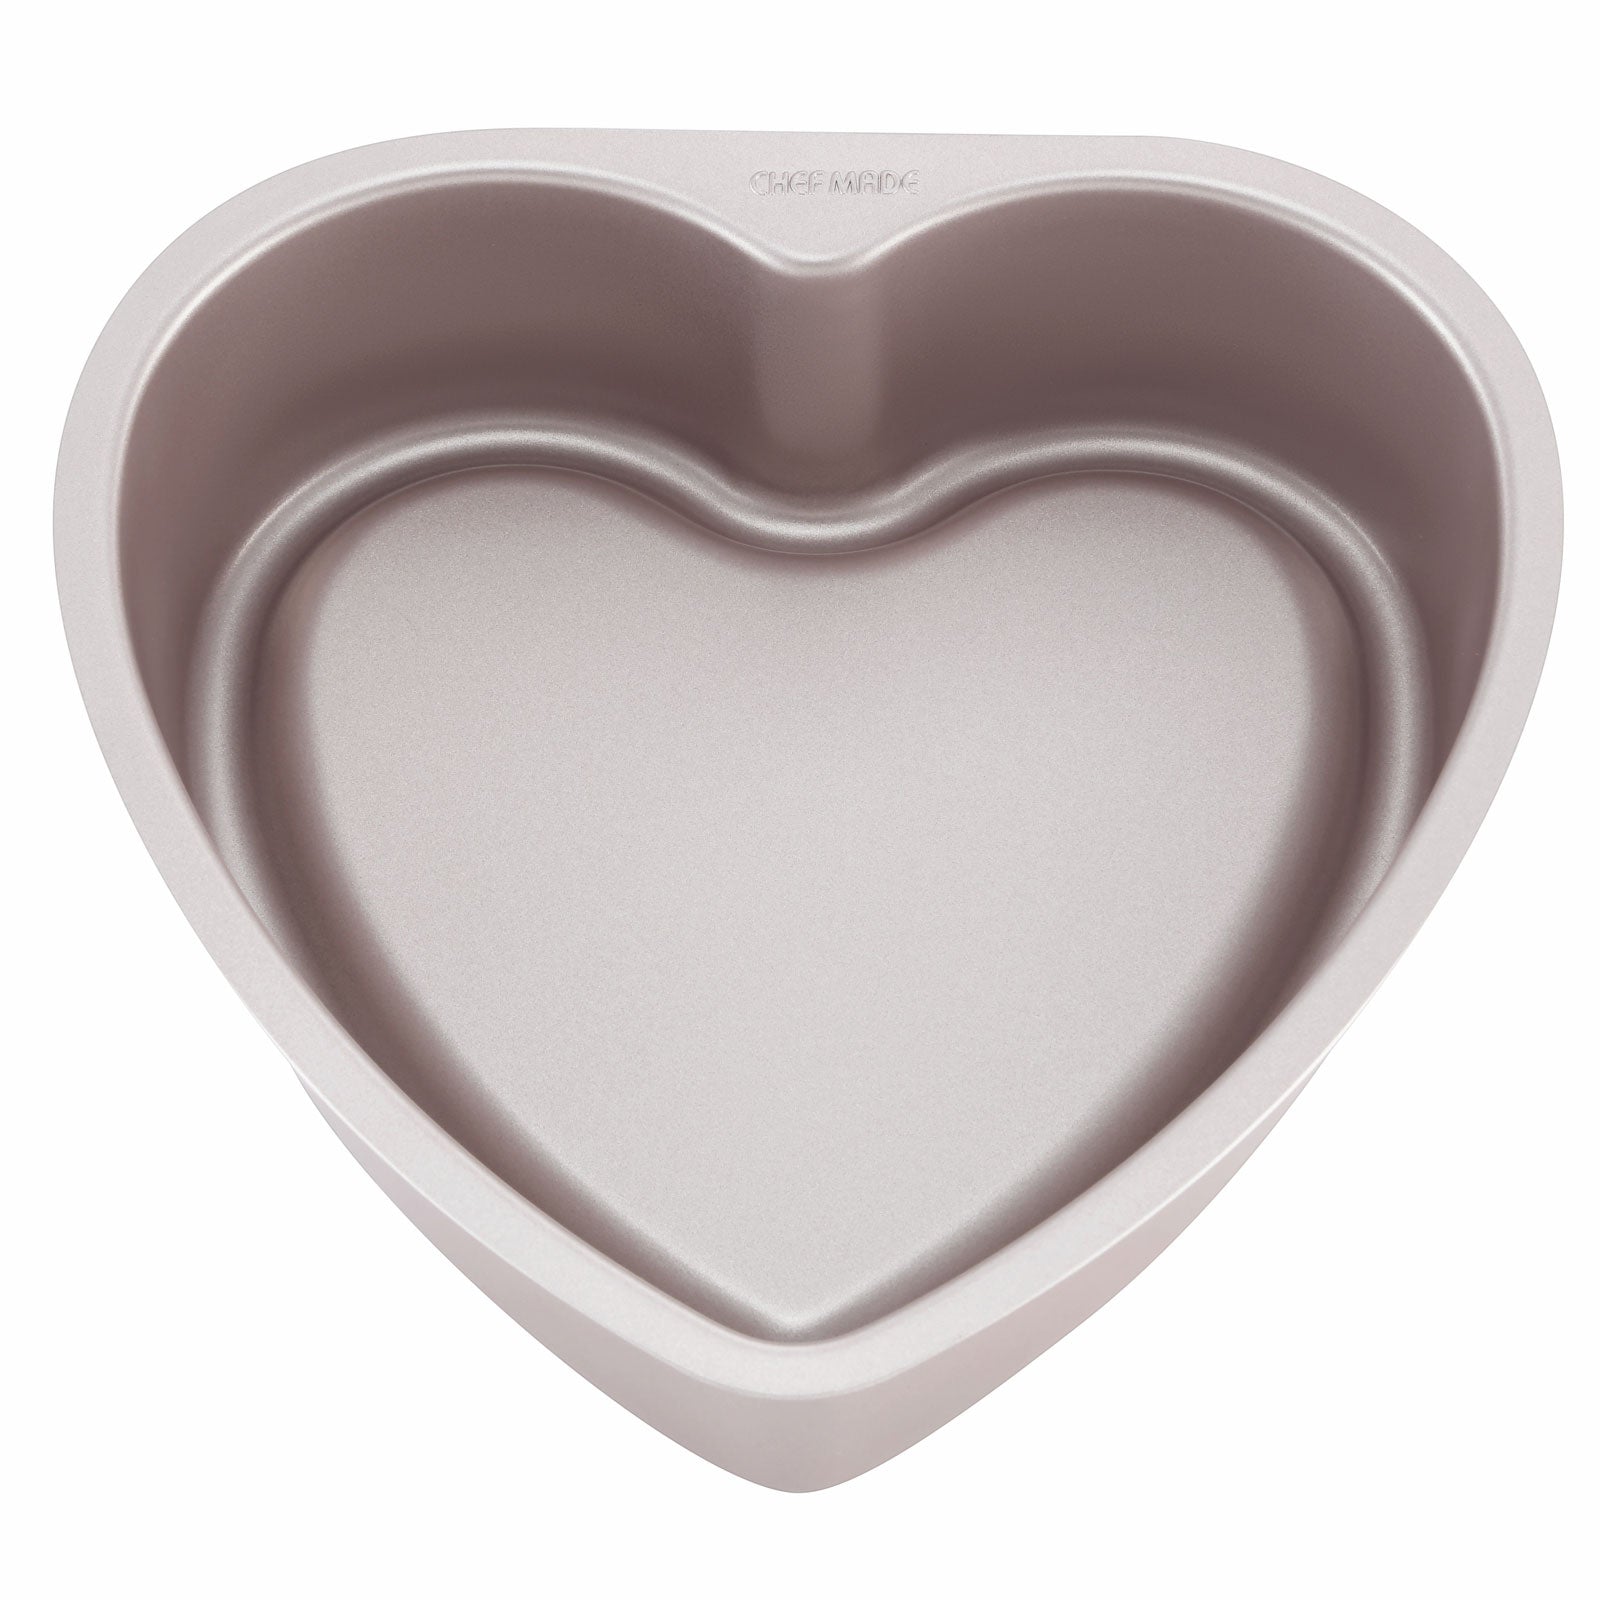 Buy finedecor silicon heart mould online india at best price